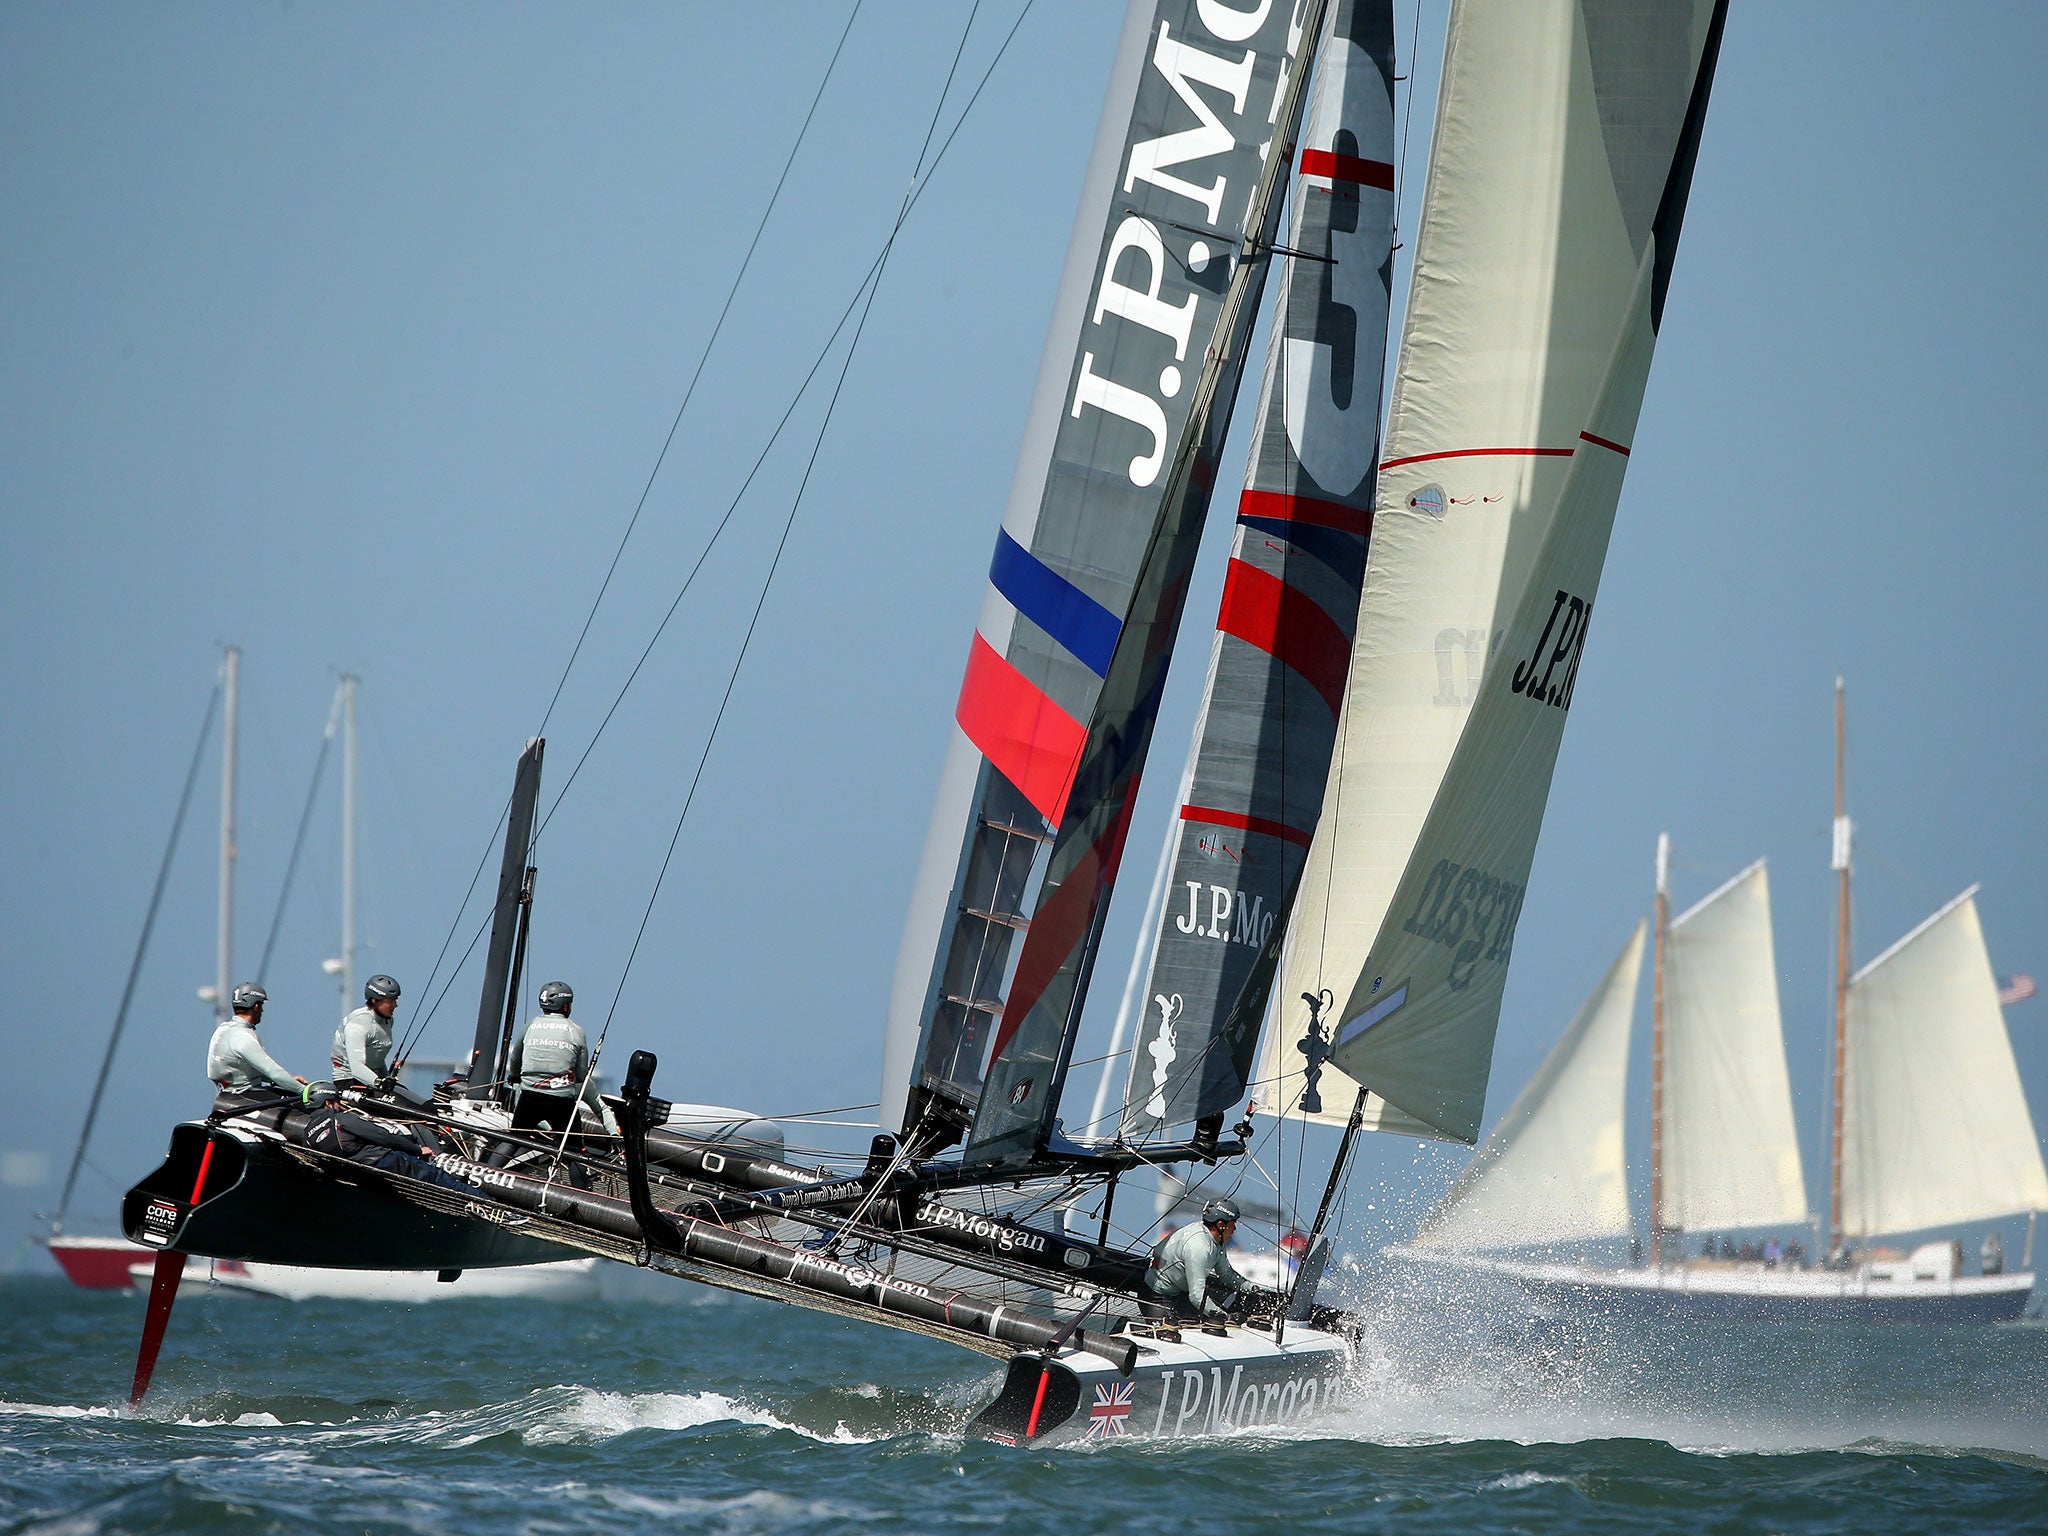 J.P. Morgan BAR team skippered by Ben Ainslie competes in a match race during the America's Cup World Series on August 24, 2012